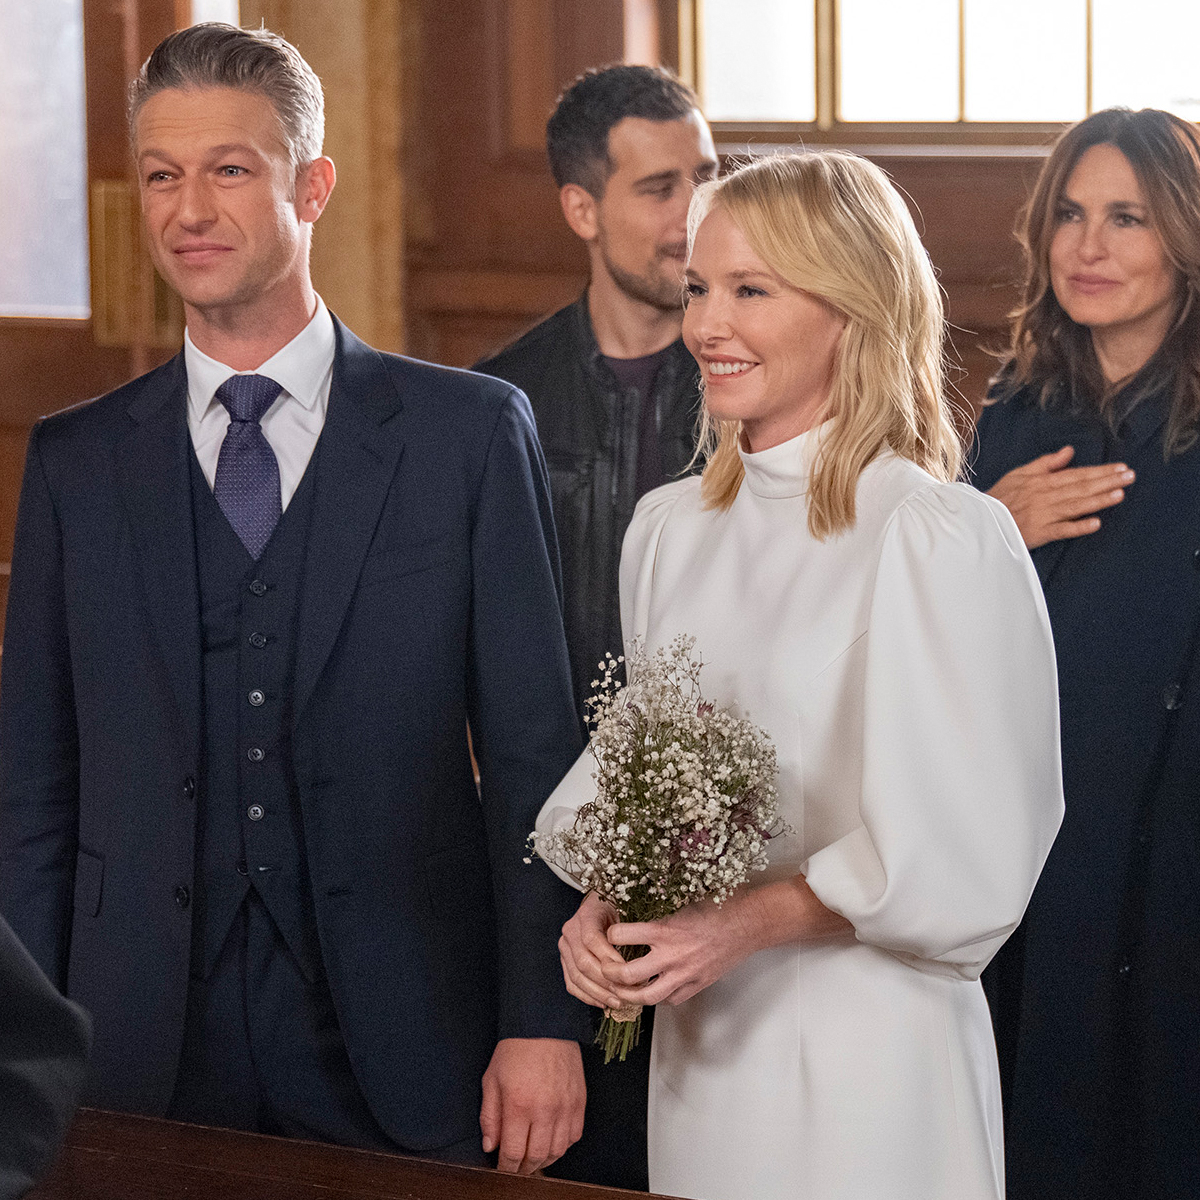 See a Preview of Kelli Giddish's Final Law & Order: SVU Episode